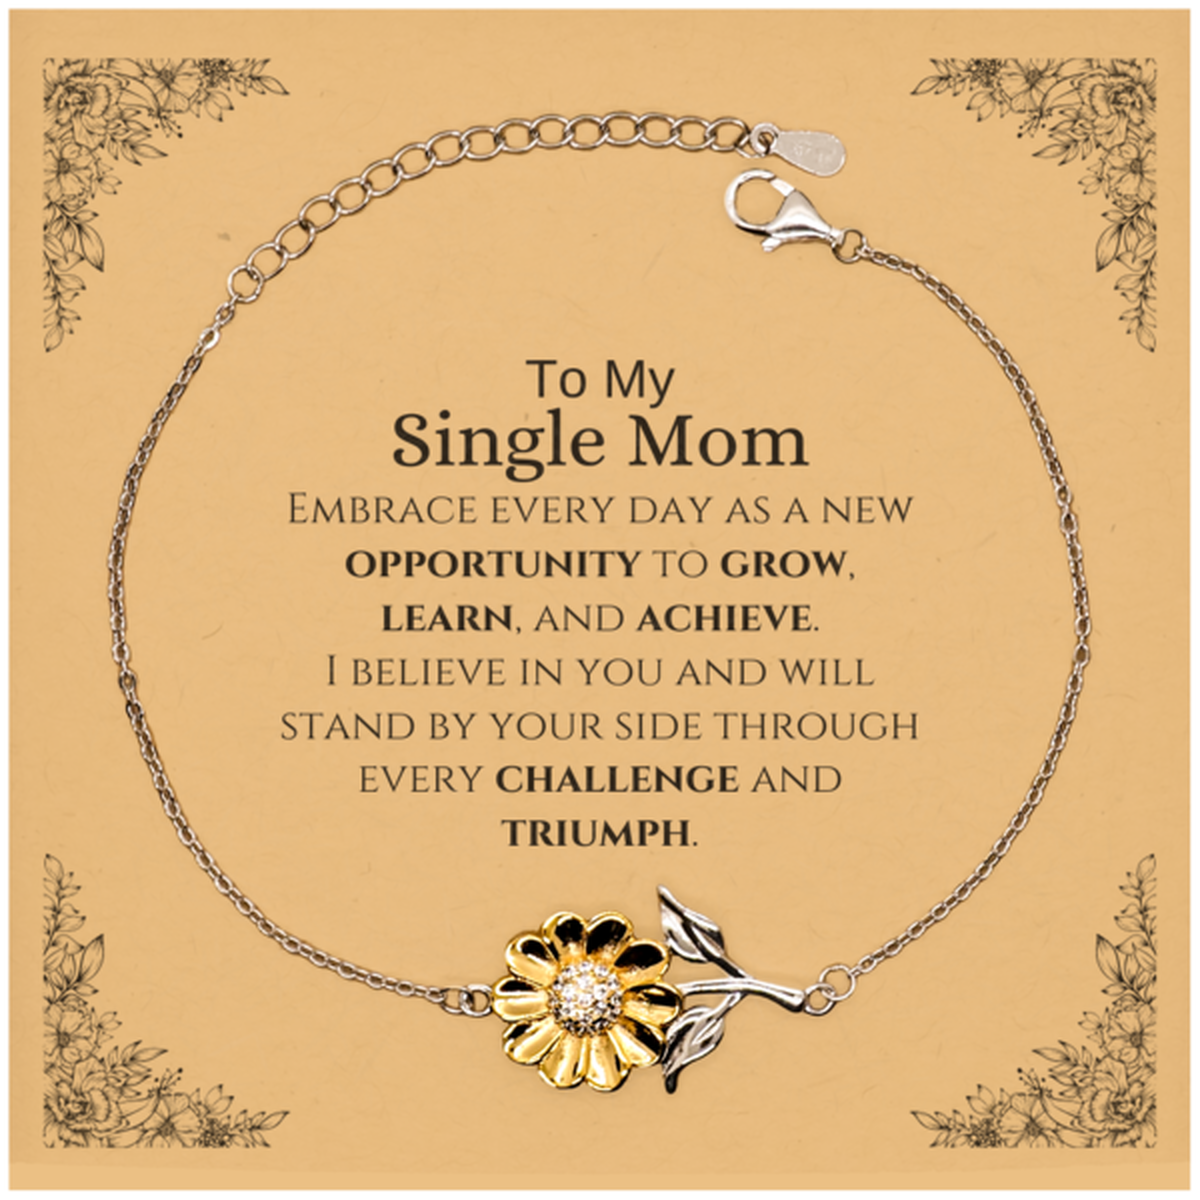 To My Single Mom Gifts, I believe in you and will stand by your side, Inspirational Sunflower Bracelet For Single Mom, Birthday Christmas Motivational Single Mom Gifts